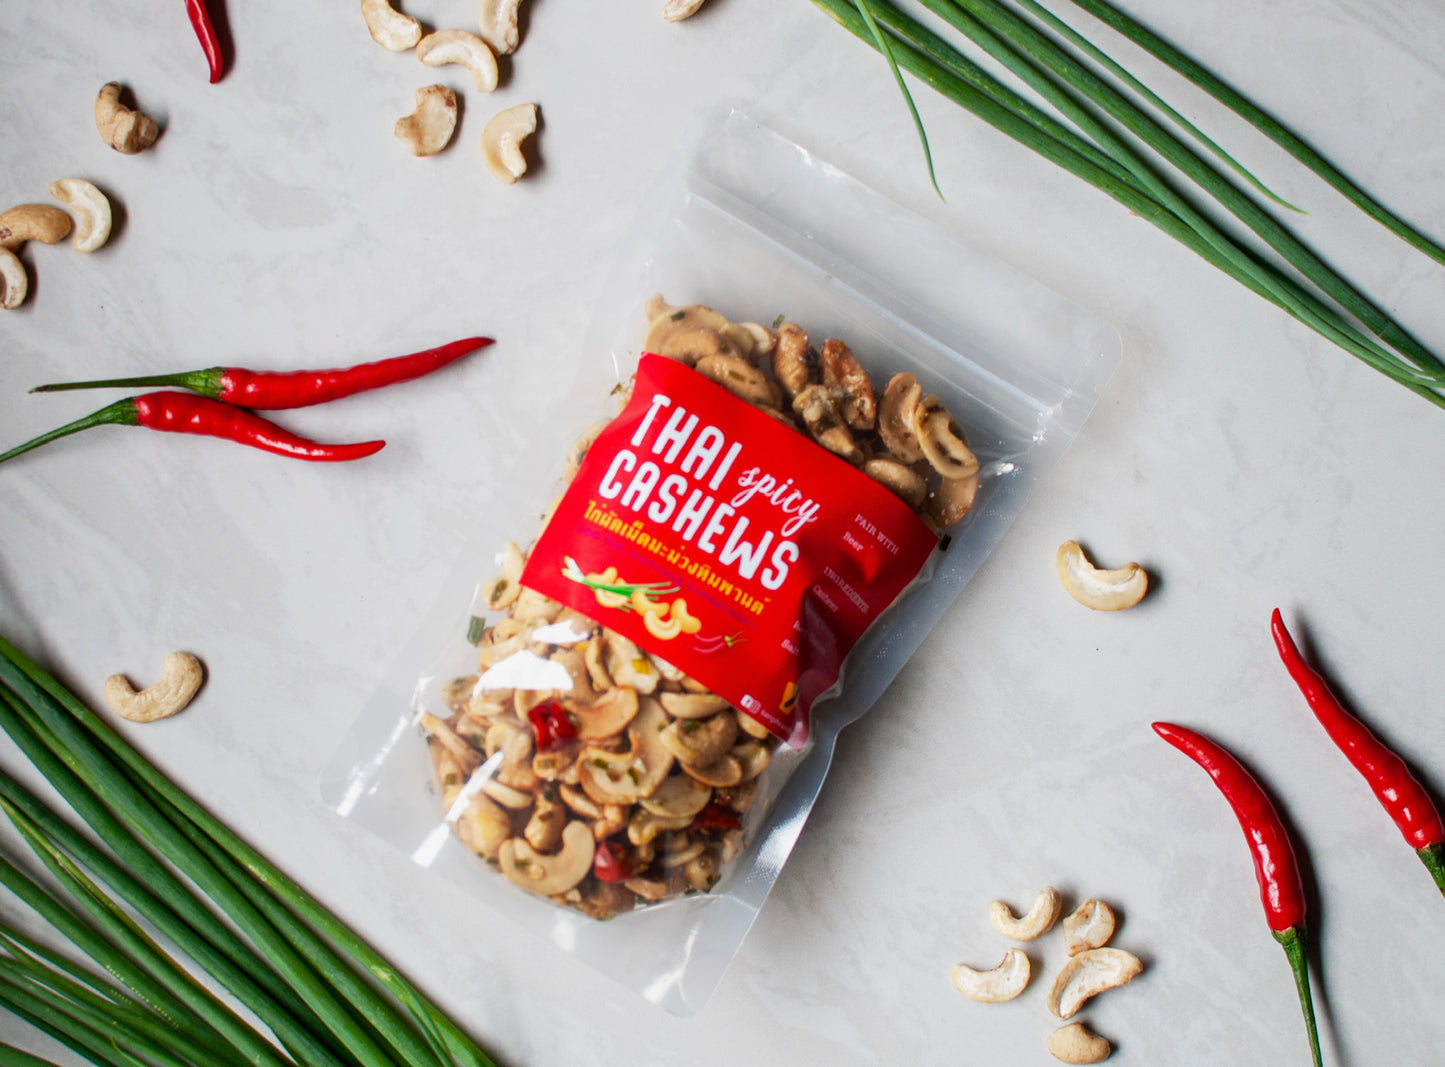 Thai Cashew Nuts with Chili